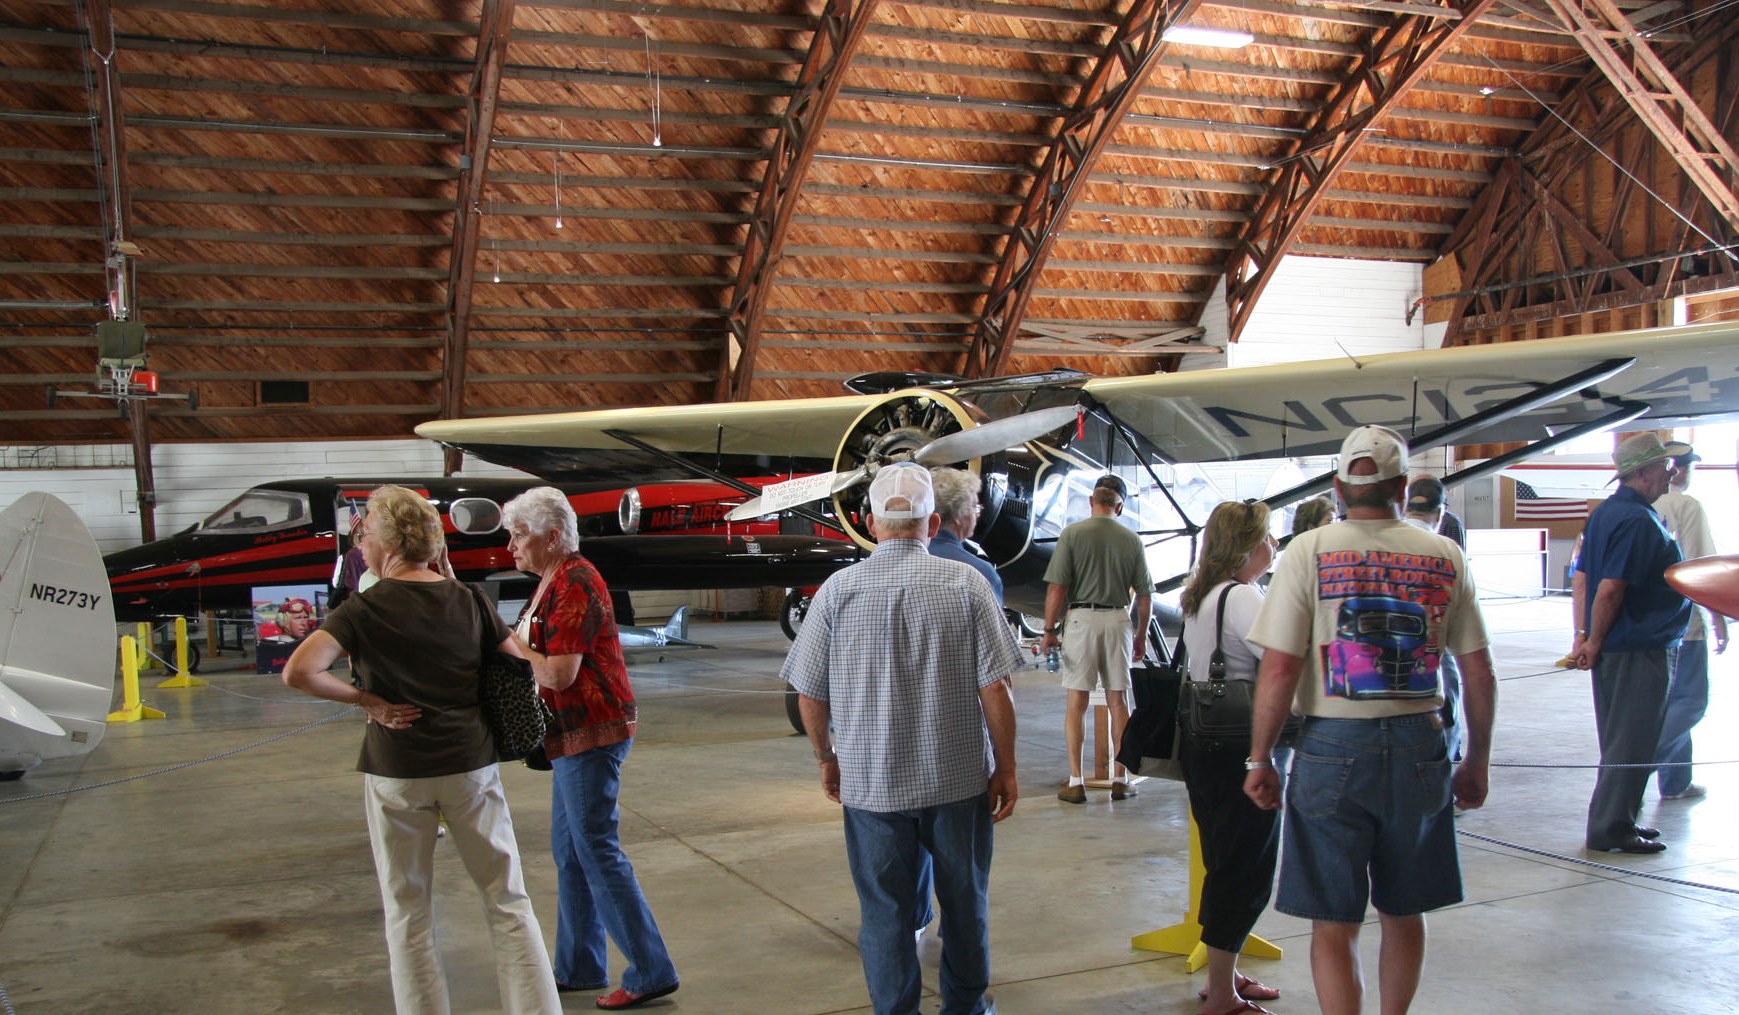 Visitors examine aircraft in White Hangar at Drake Field in Fayetteville, Arkansas, one of only a dozen remaining WWII-era aircraft hangars.